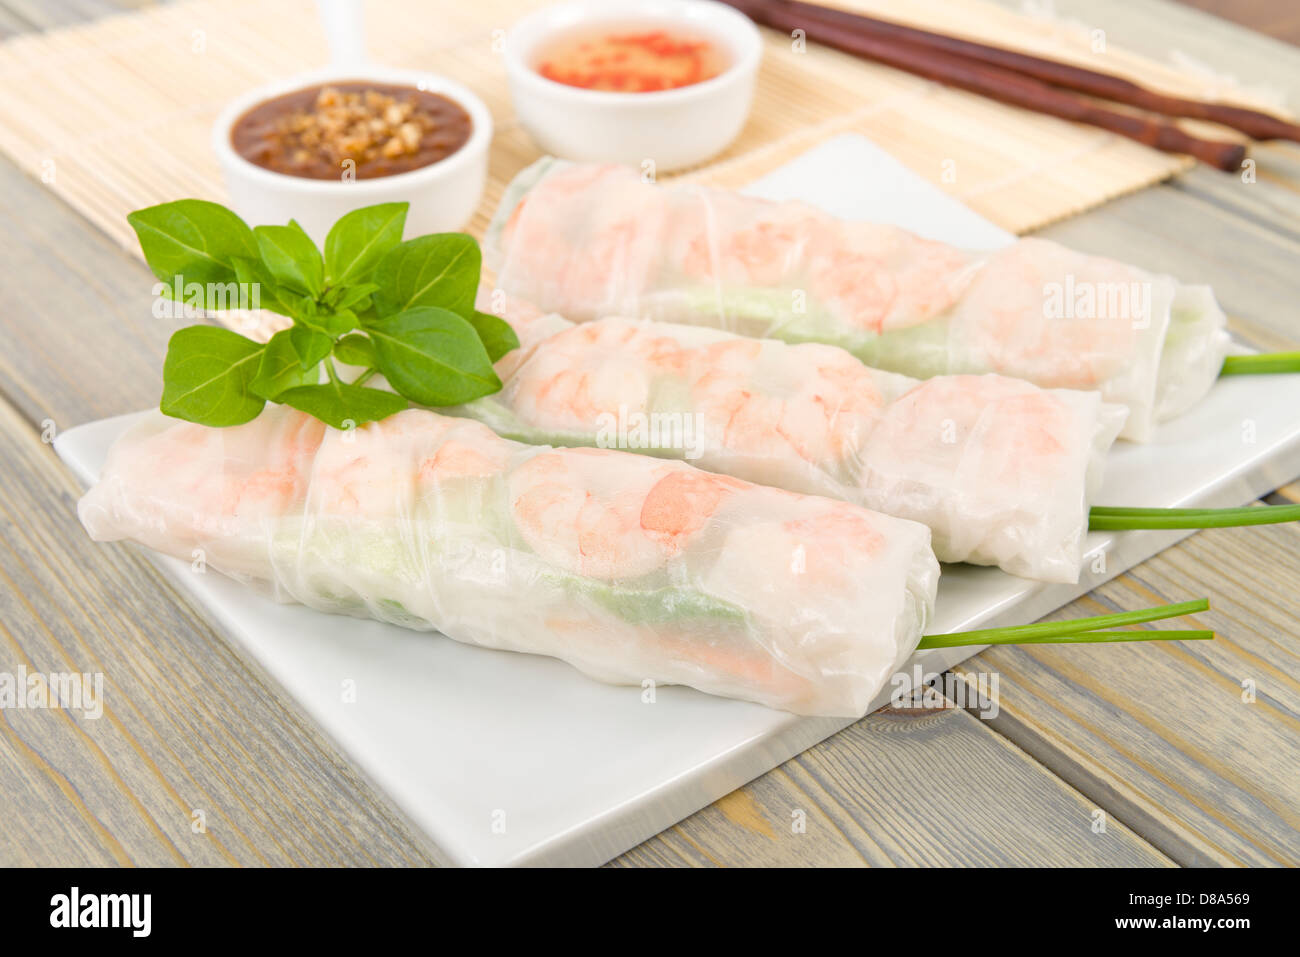 Goi Cuon - Vietnamese fresh summer rolls filled with prawns, pork, herbs, rice vermicelli and vegetables. Stock Photo